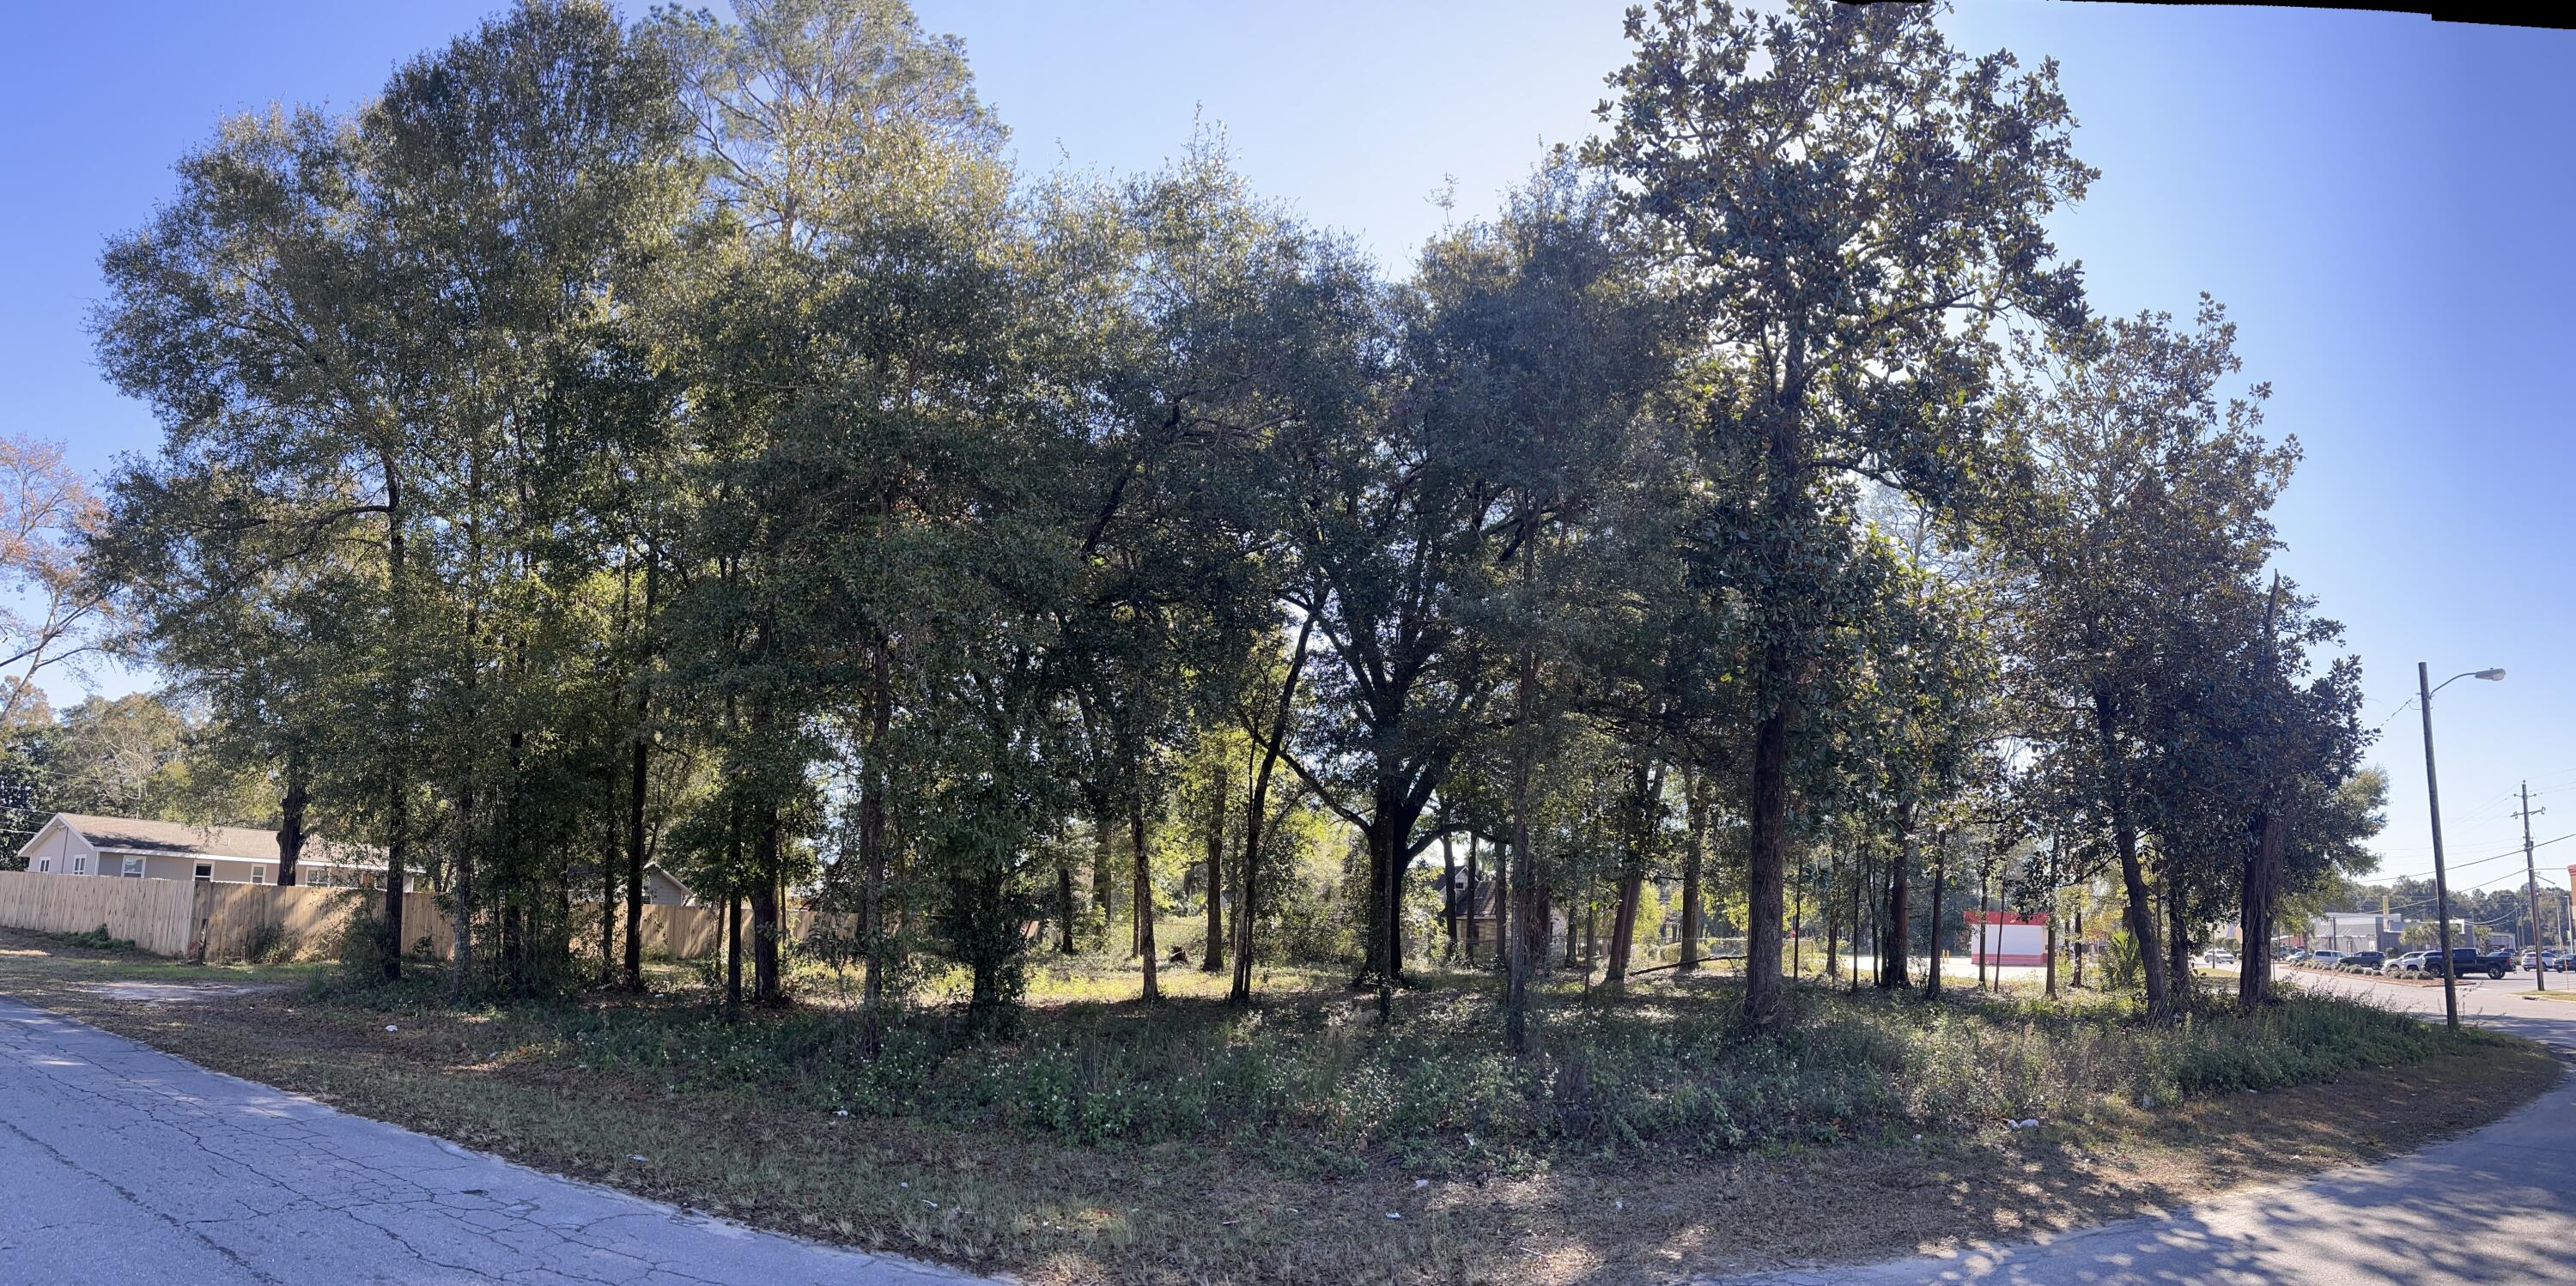 a view of outdoor space with trees